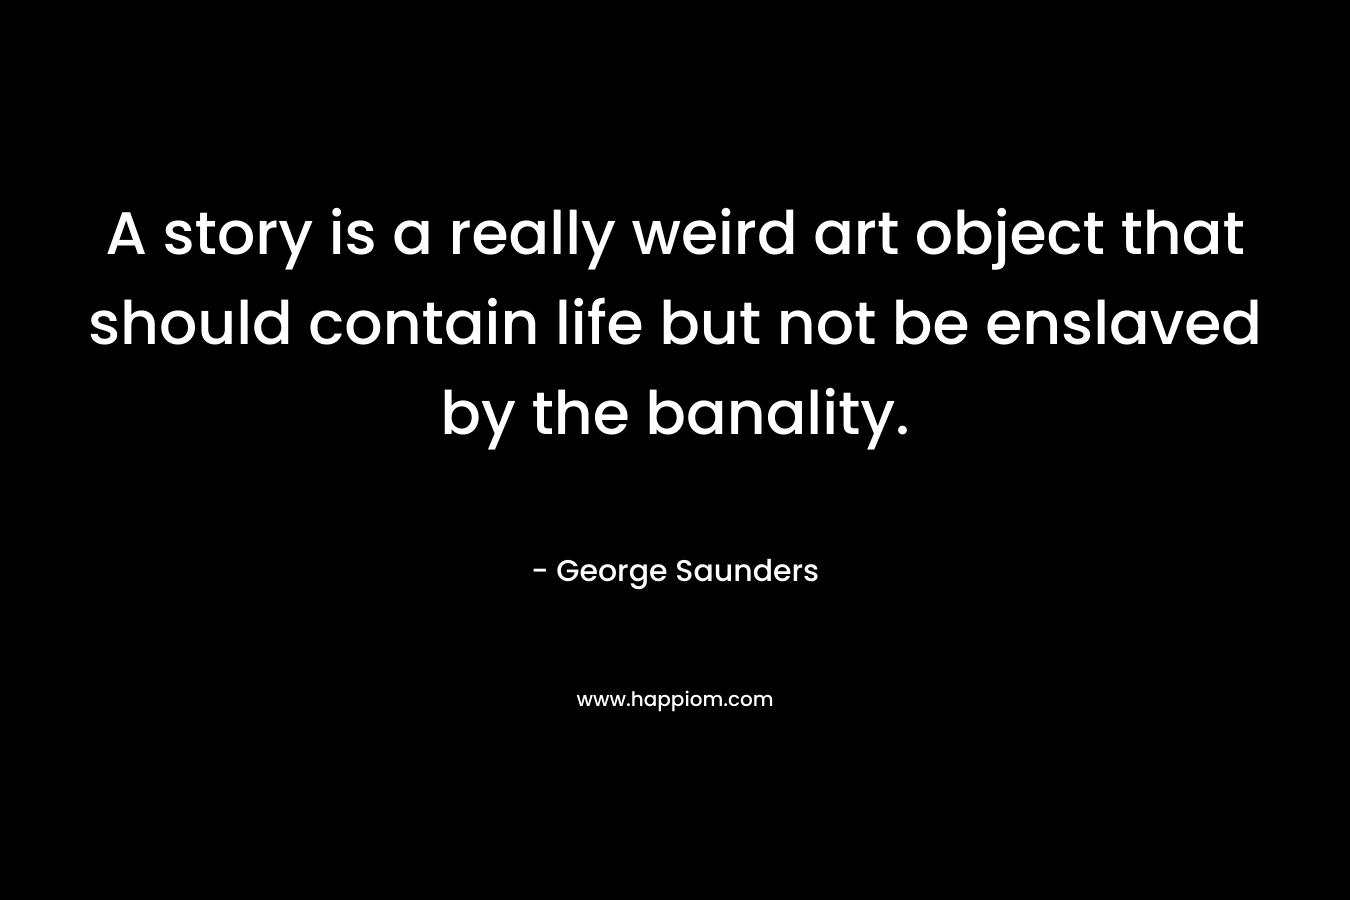 A story is a really weird art object that should contain life but not be enslaved by the banality. – George Saunders